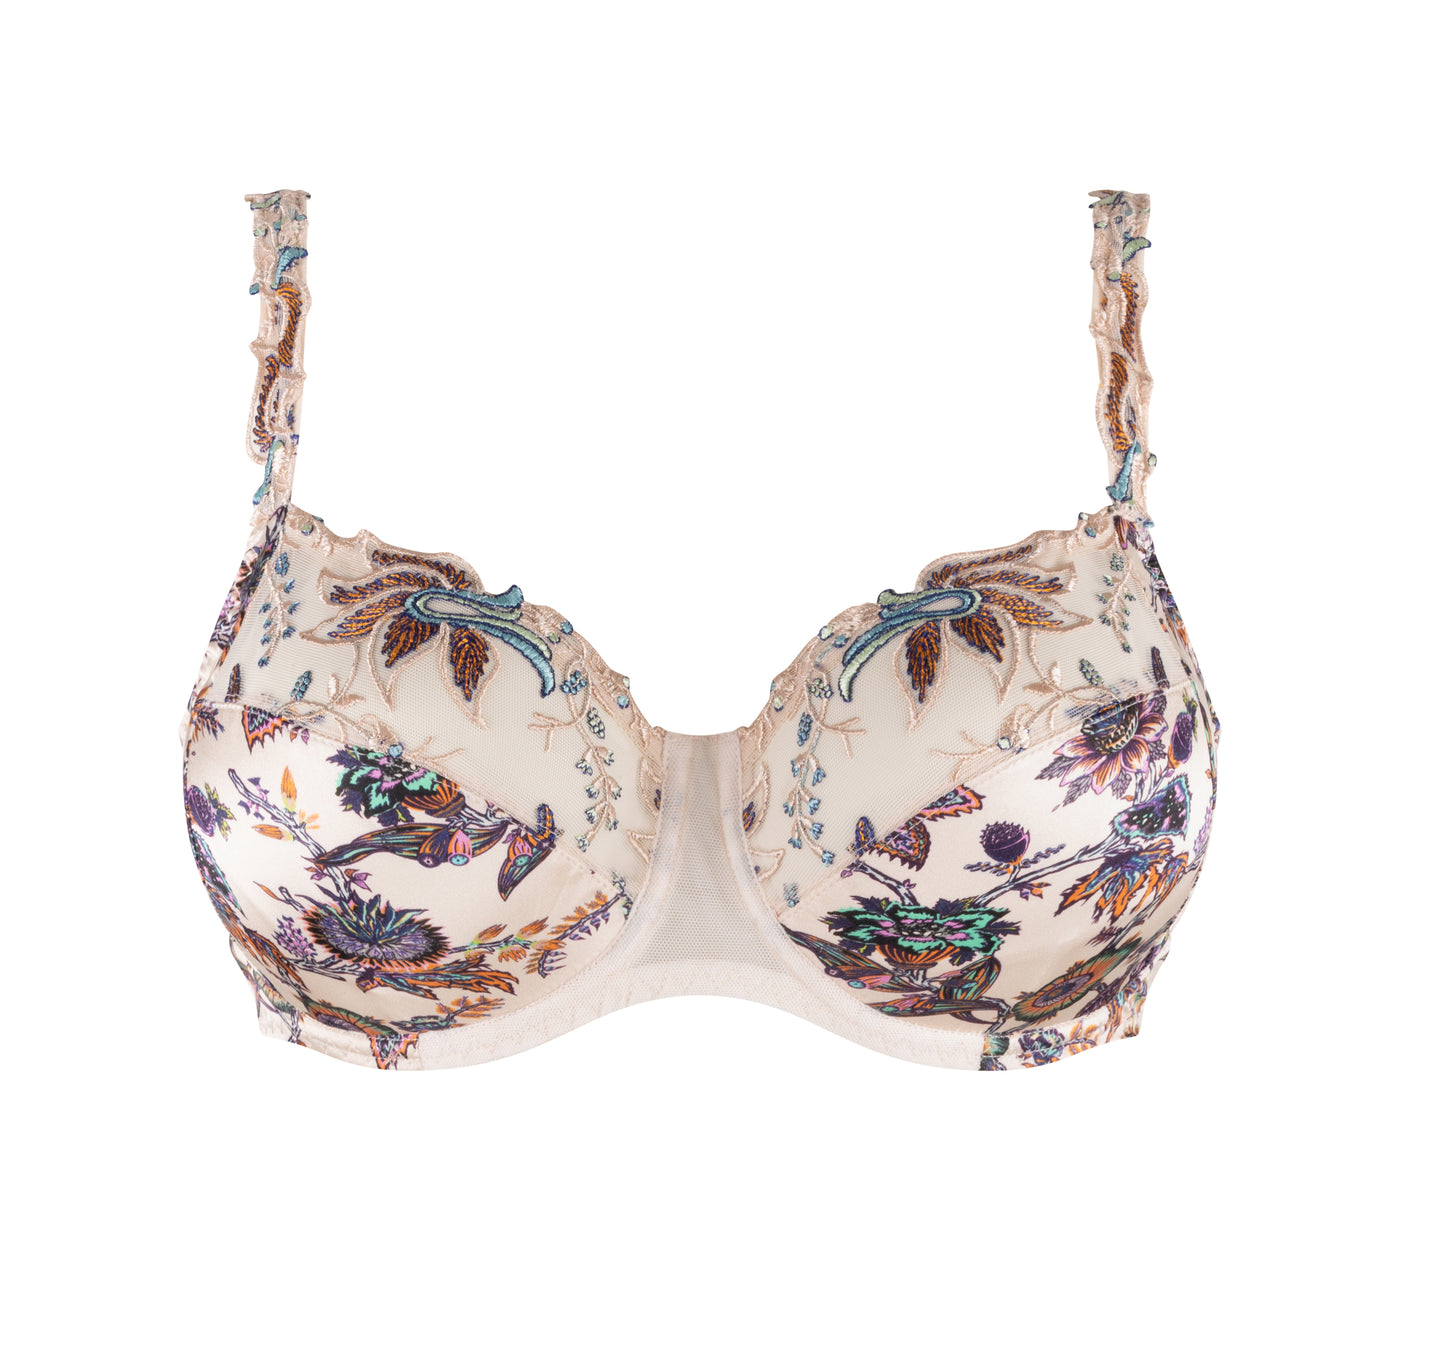 Bybliss Full Cup Bra By Louisa Bracq - 32-44 bands, B-G cups (UK sizing)